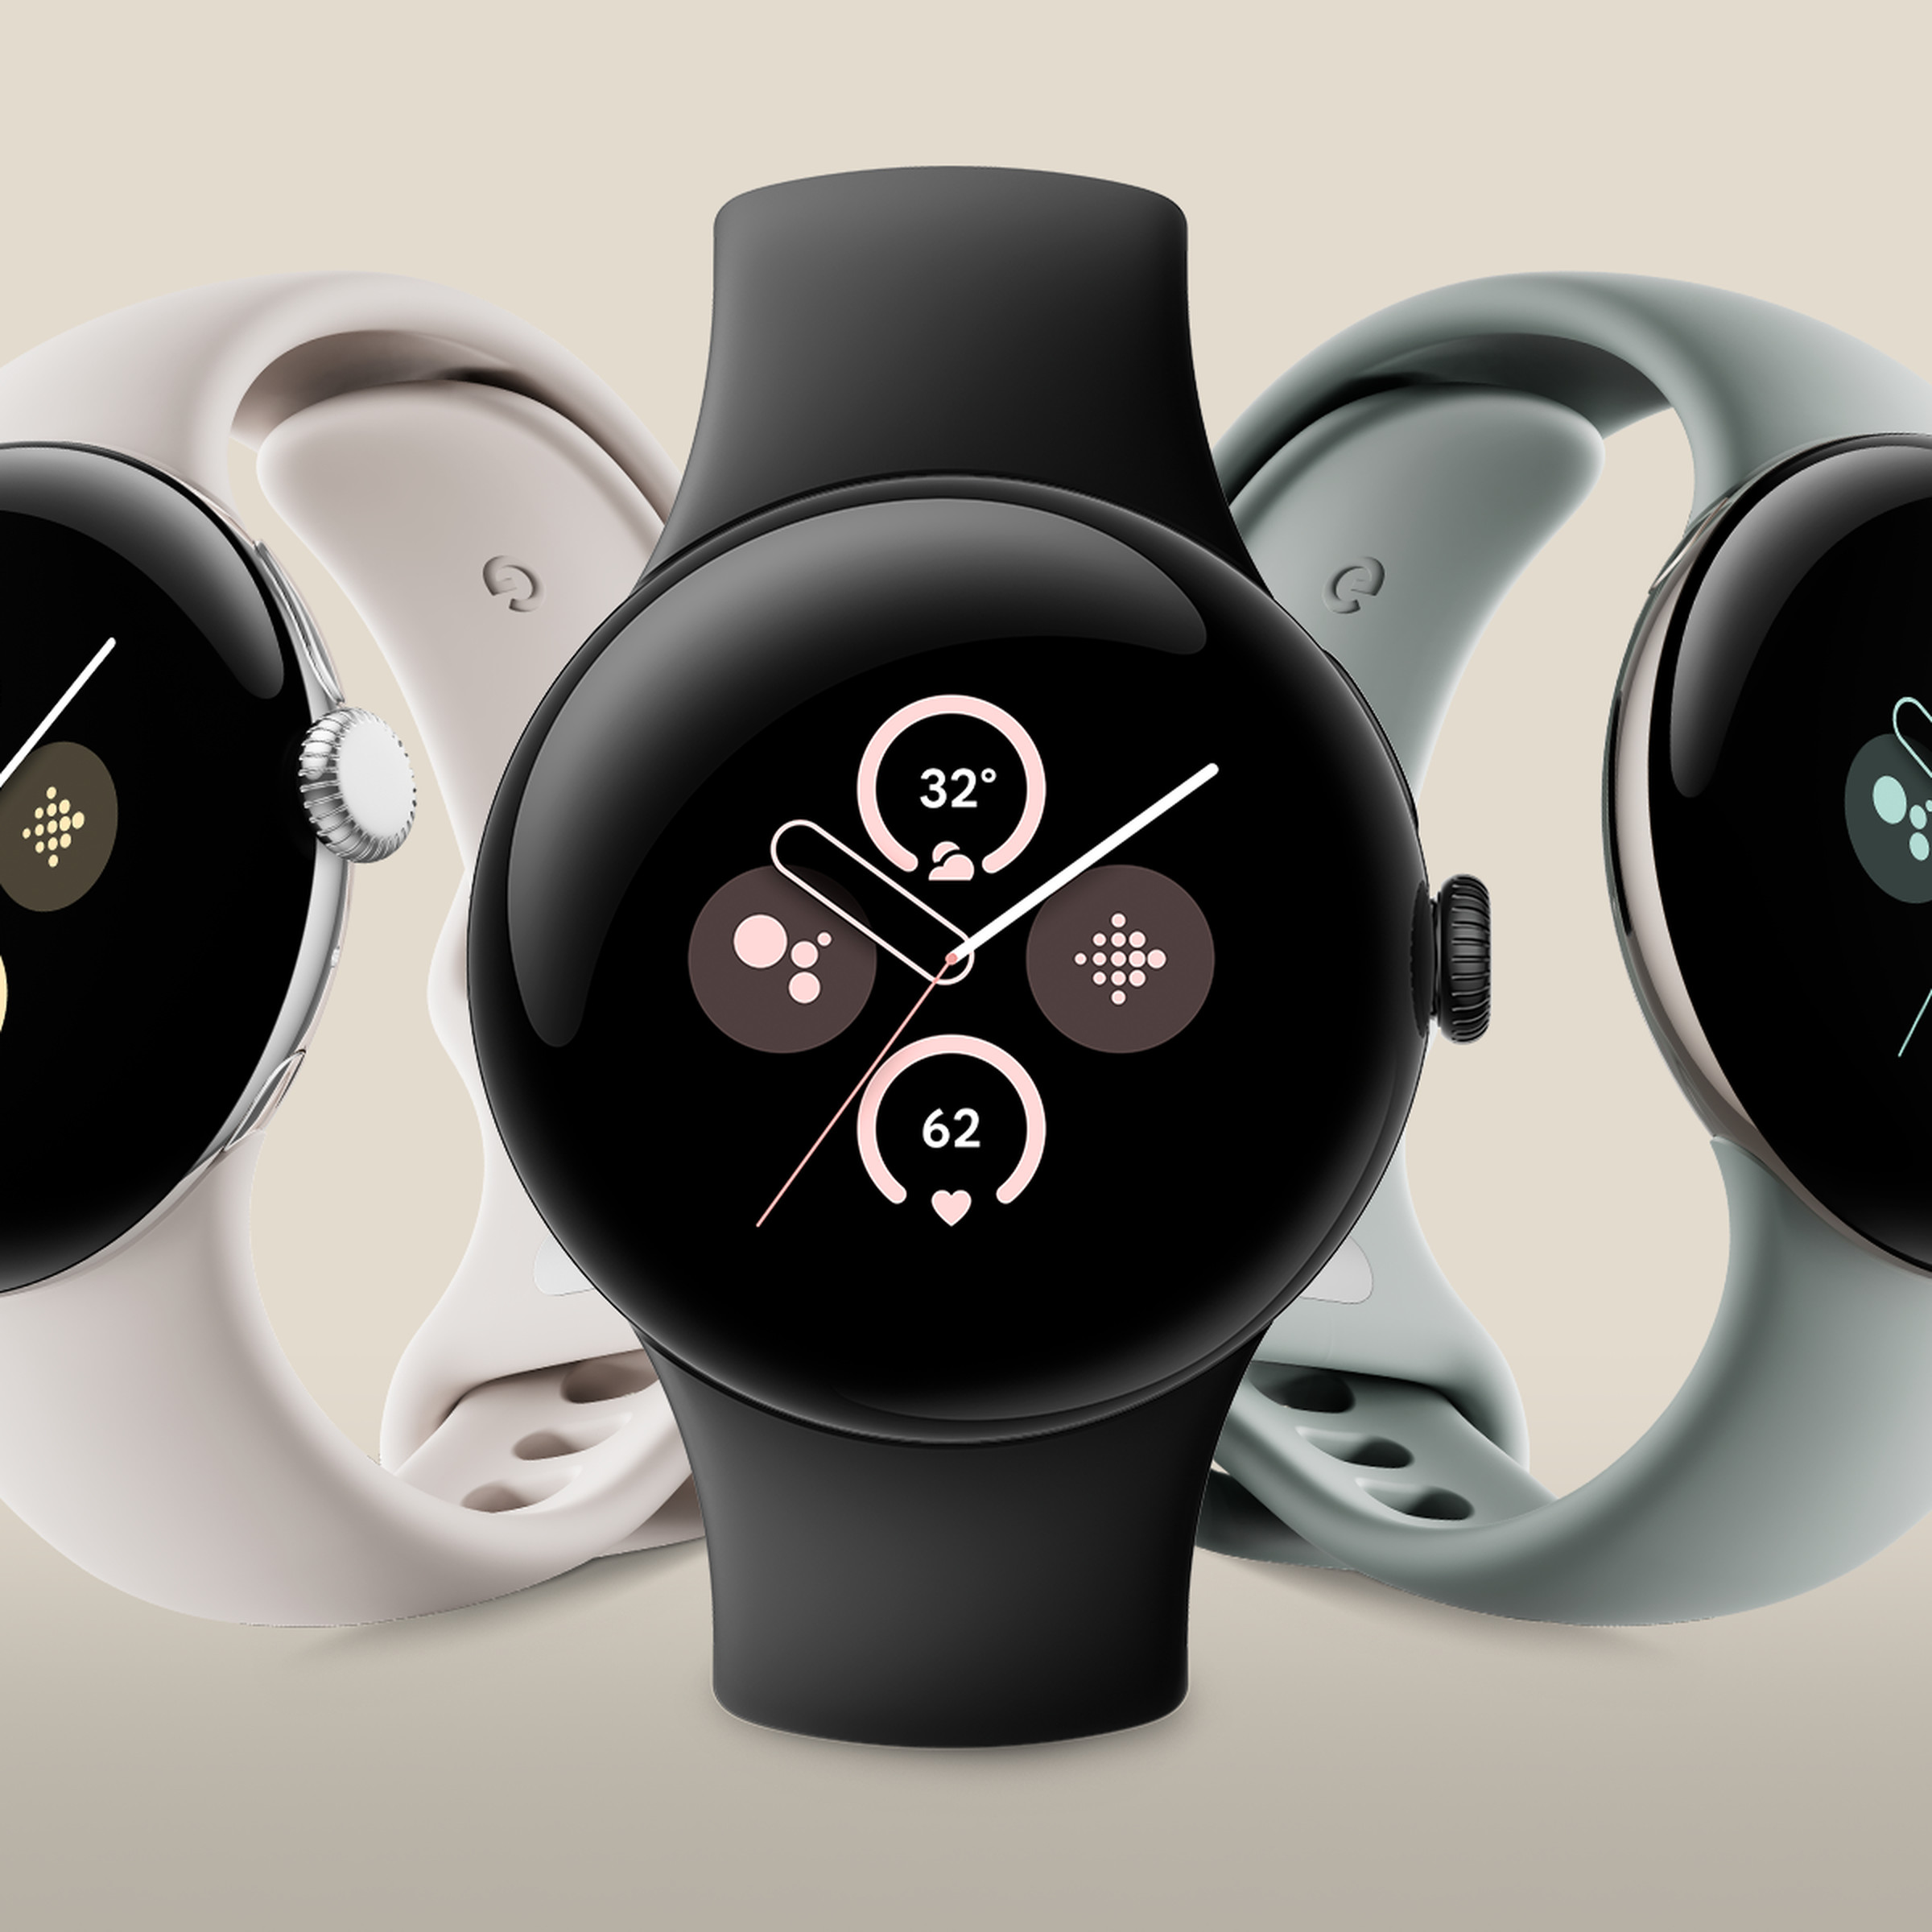 The Google Pixel Watch 2 in its three case colors and finishes (left to right) : polished silver, matte black, and champagne gold.